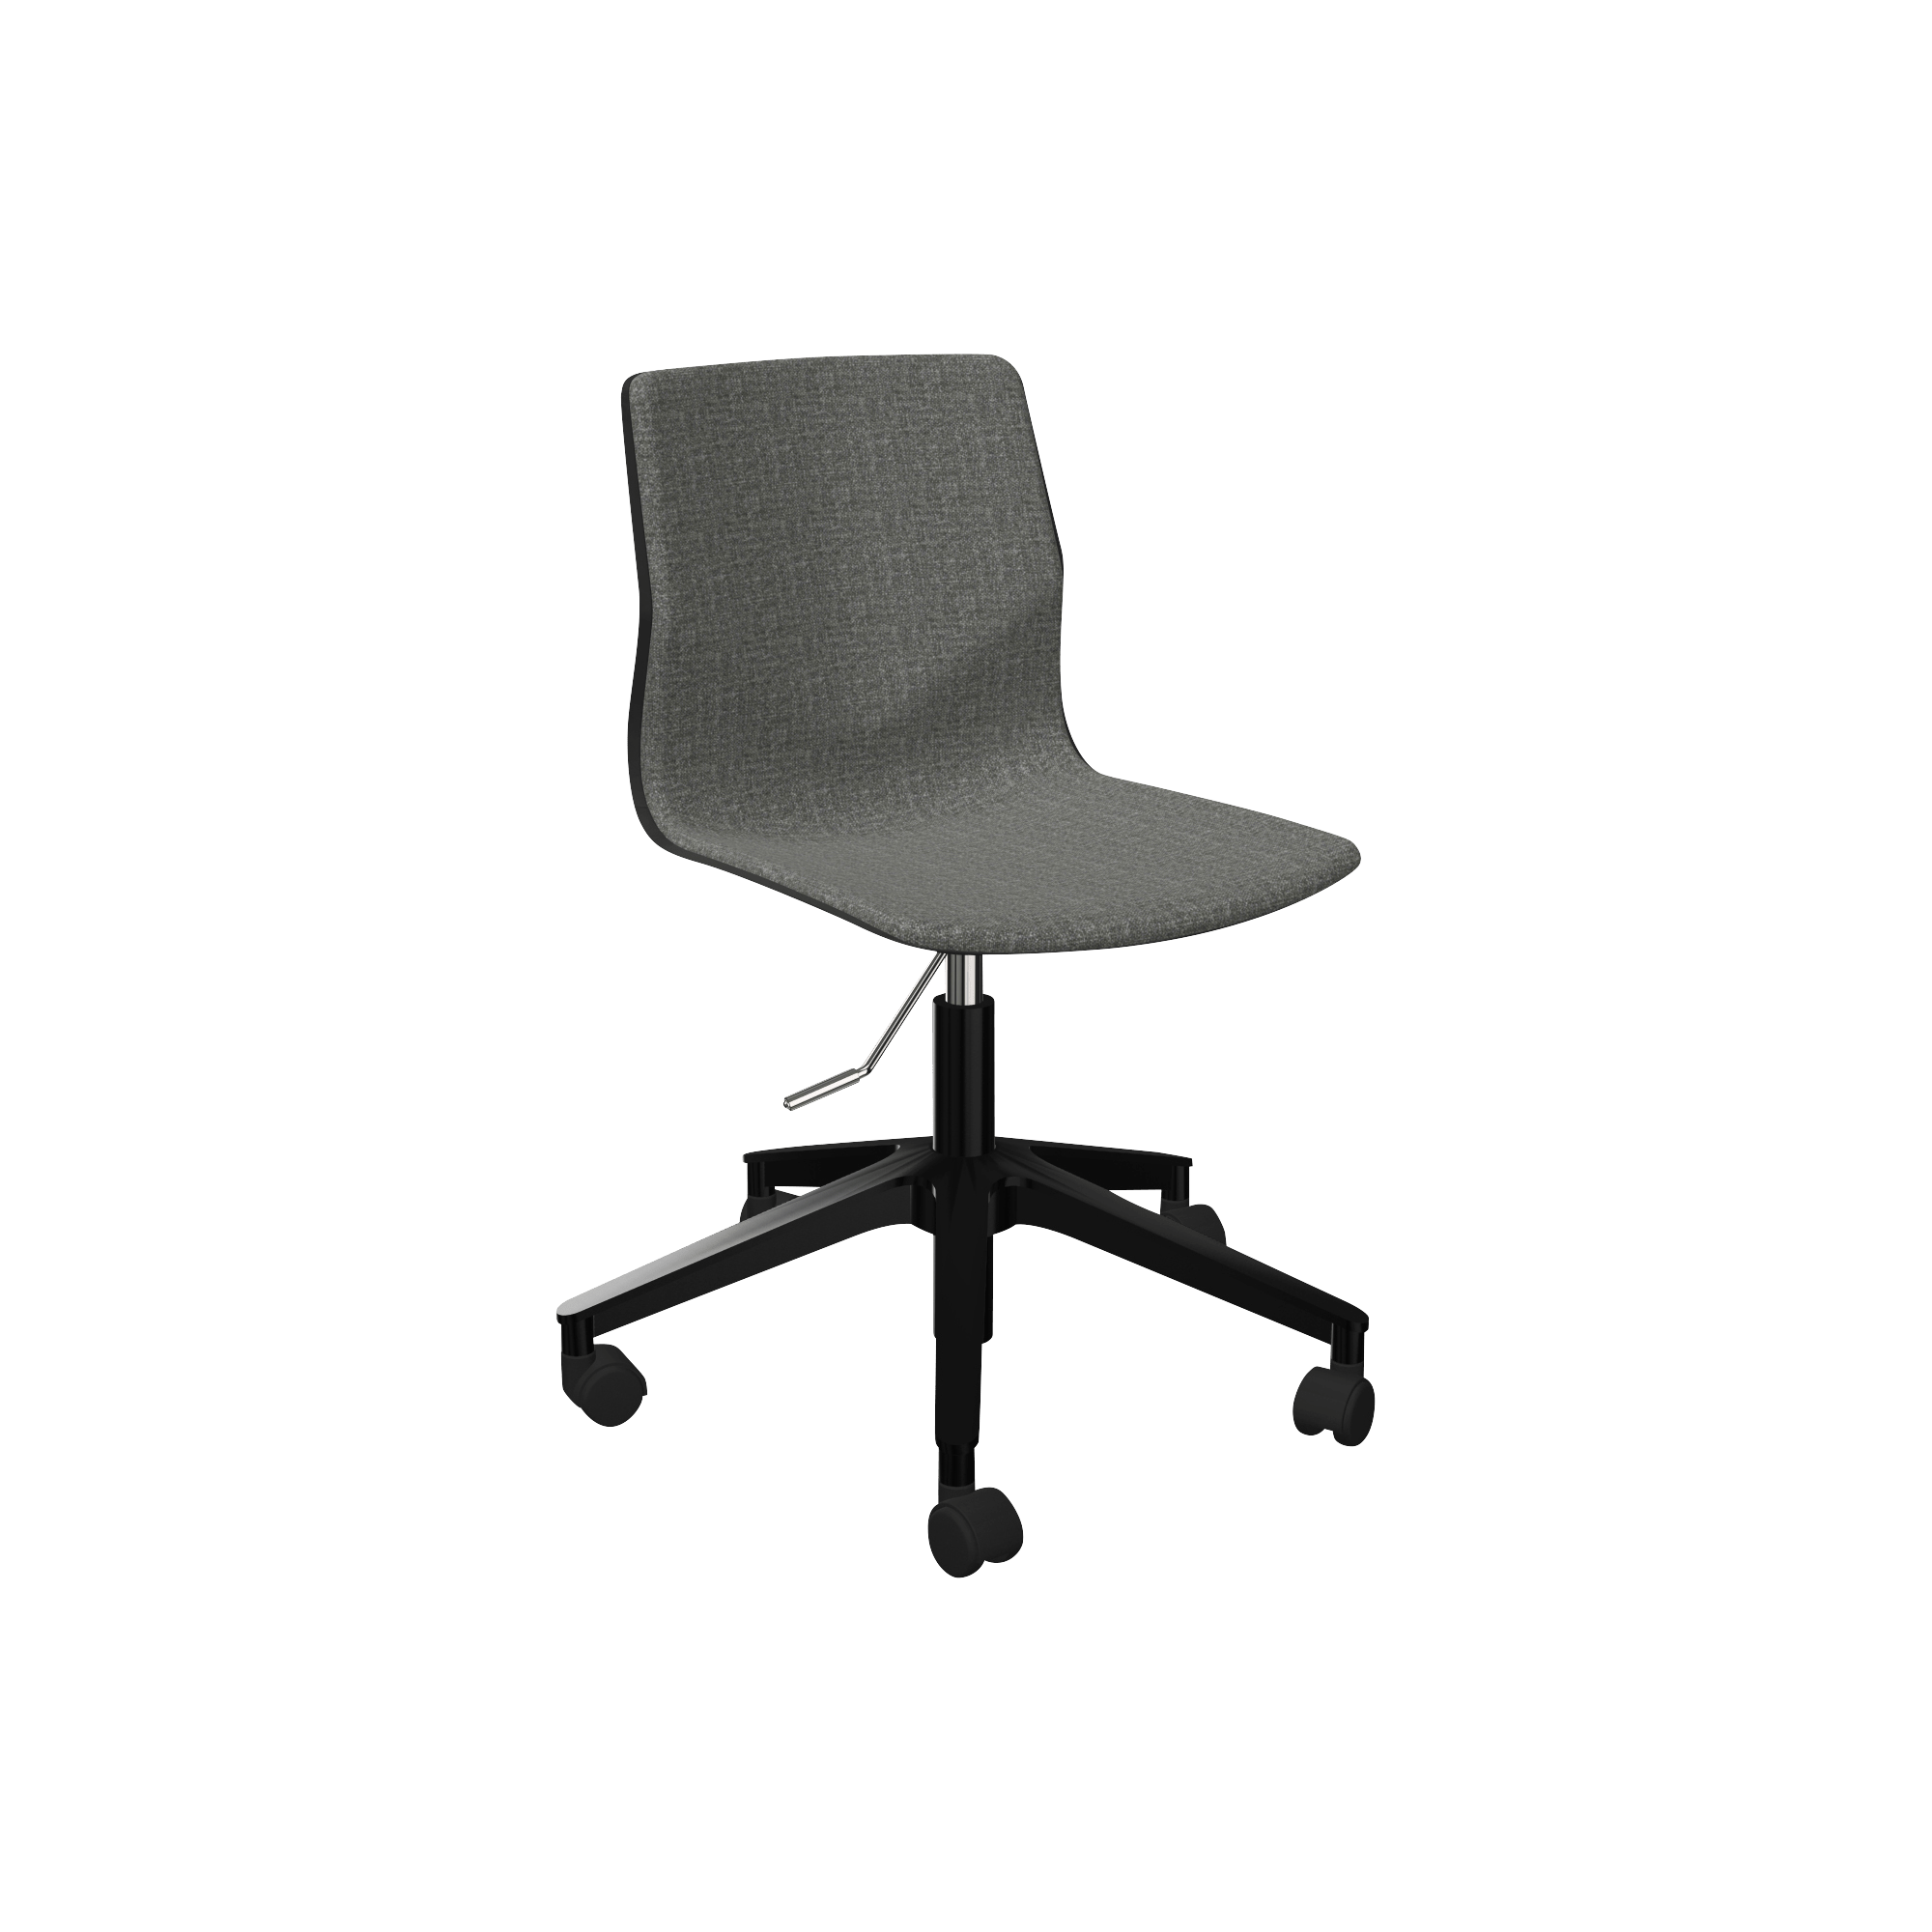 Grey adjustable height office chair with wheels